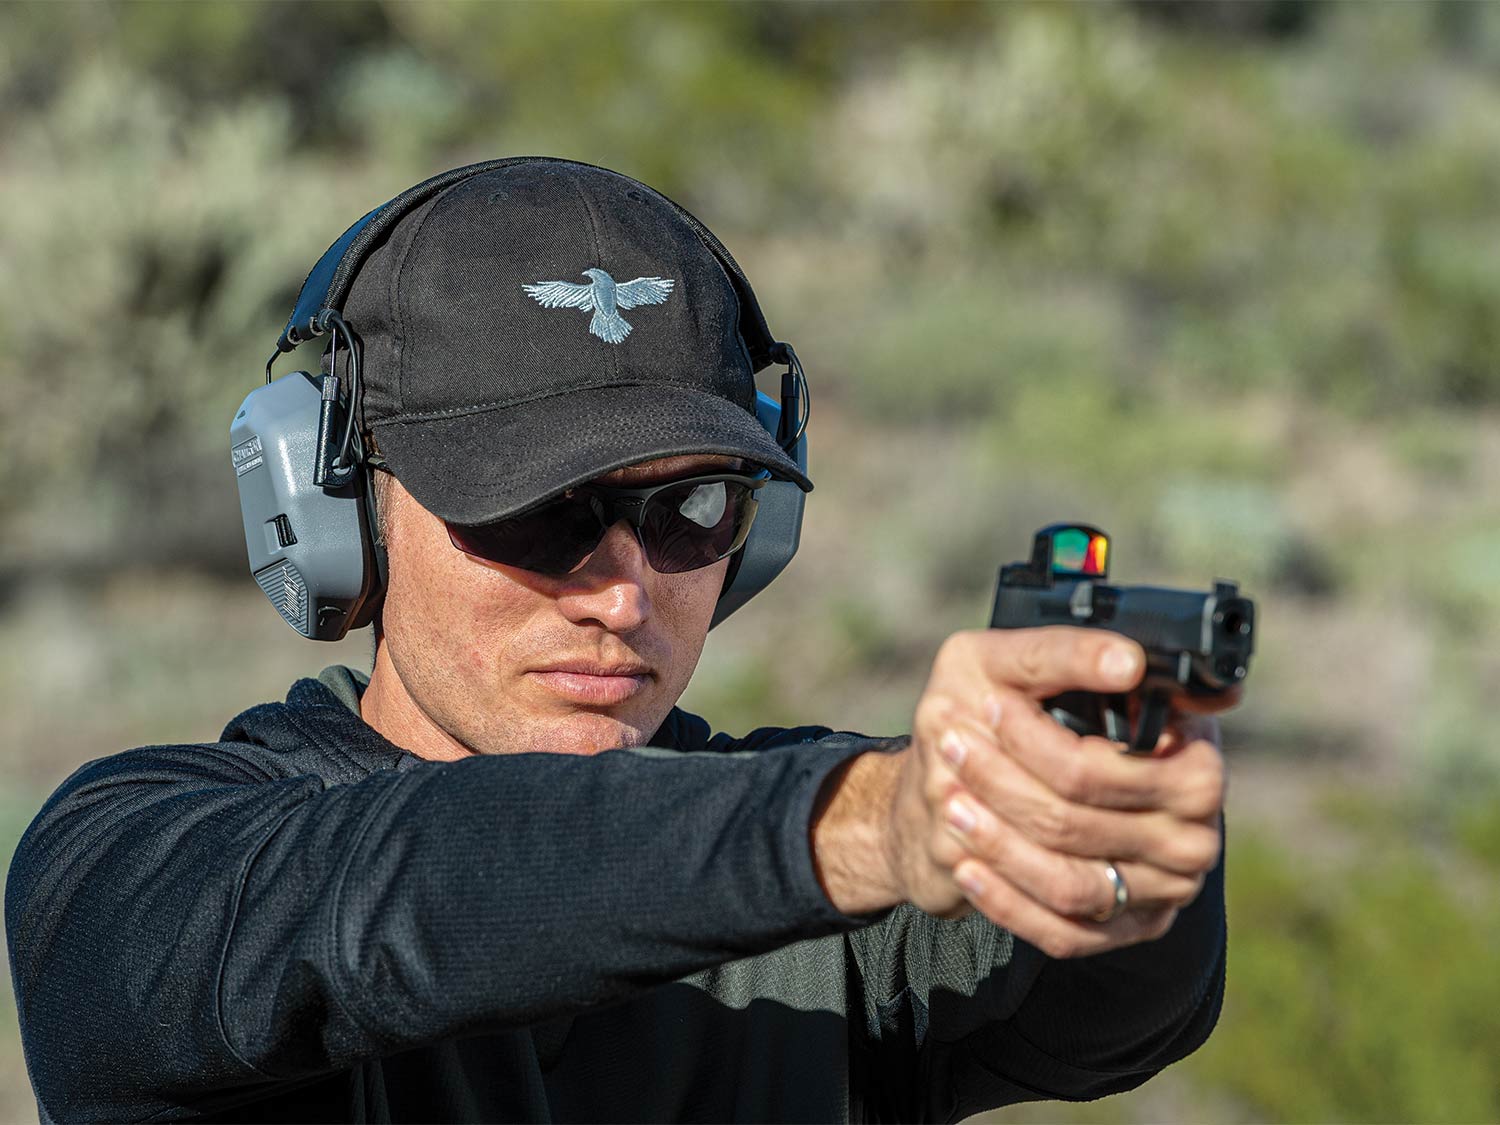 A shooter in Arizona prepares to ring steel with an RDS-equipped pistol.